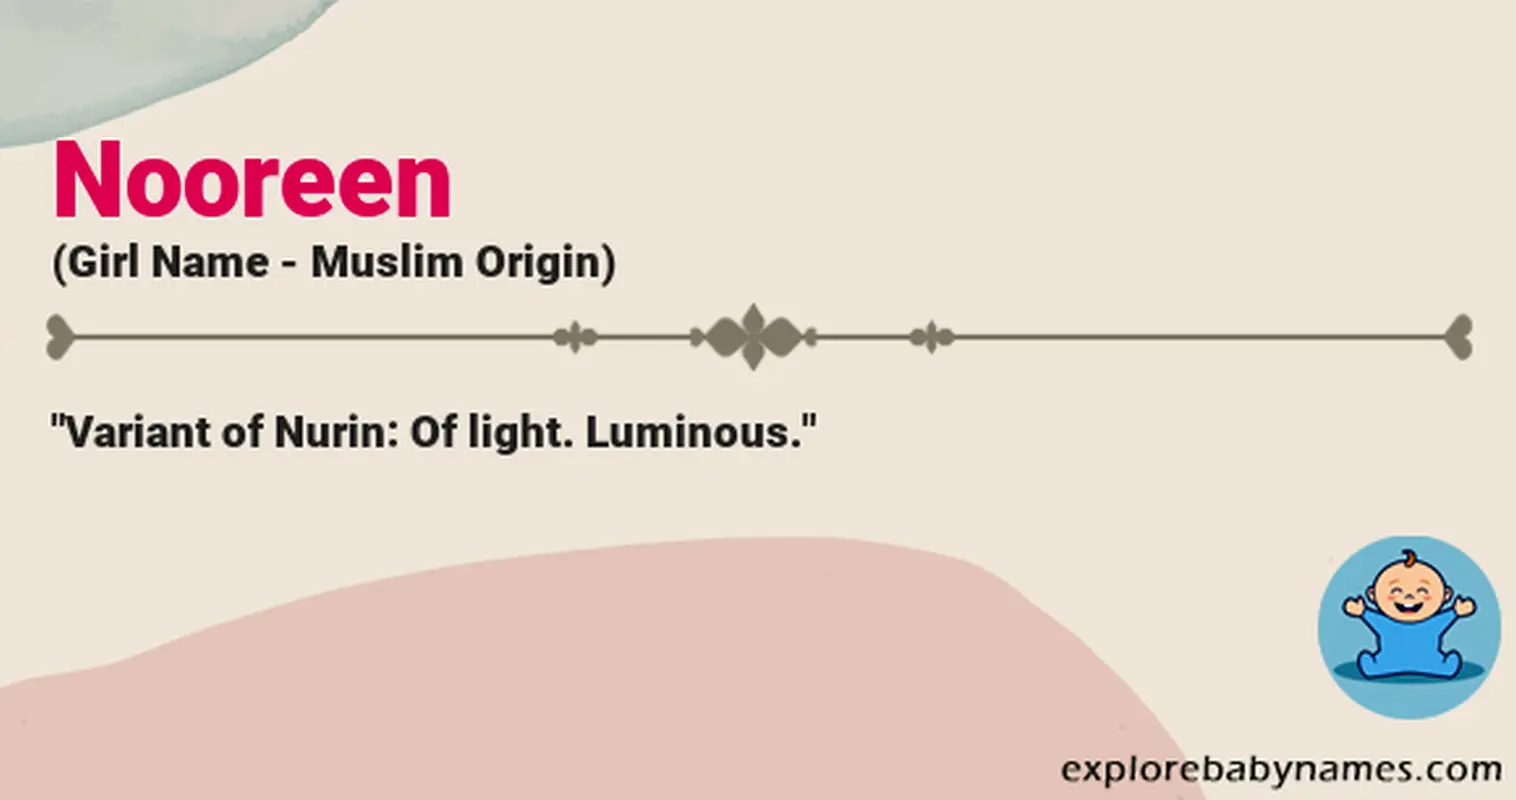 Meaning of Nooreen